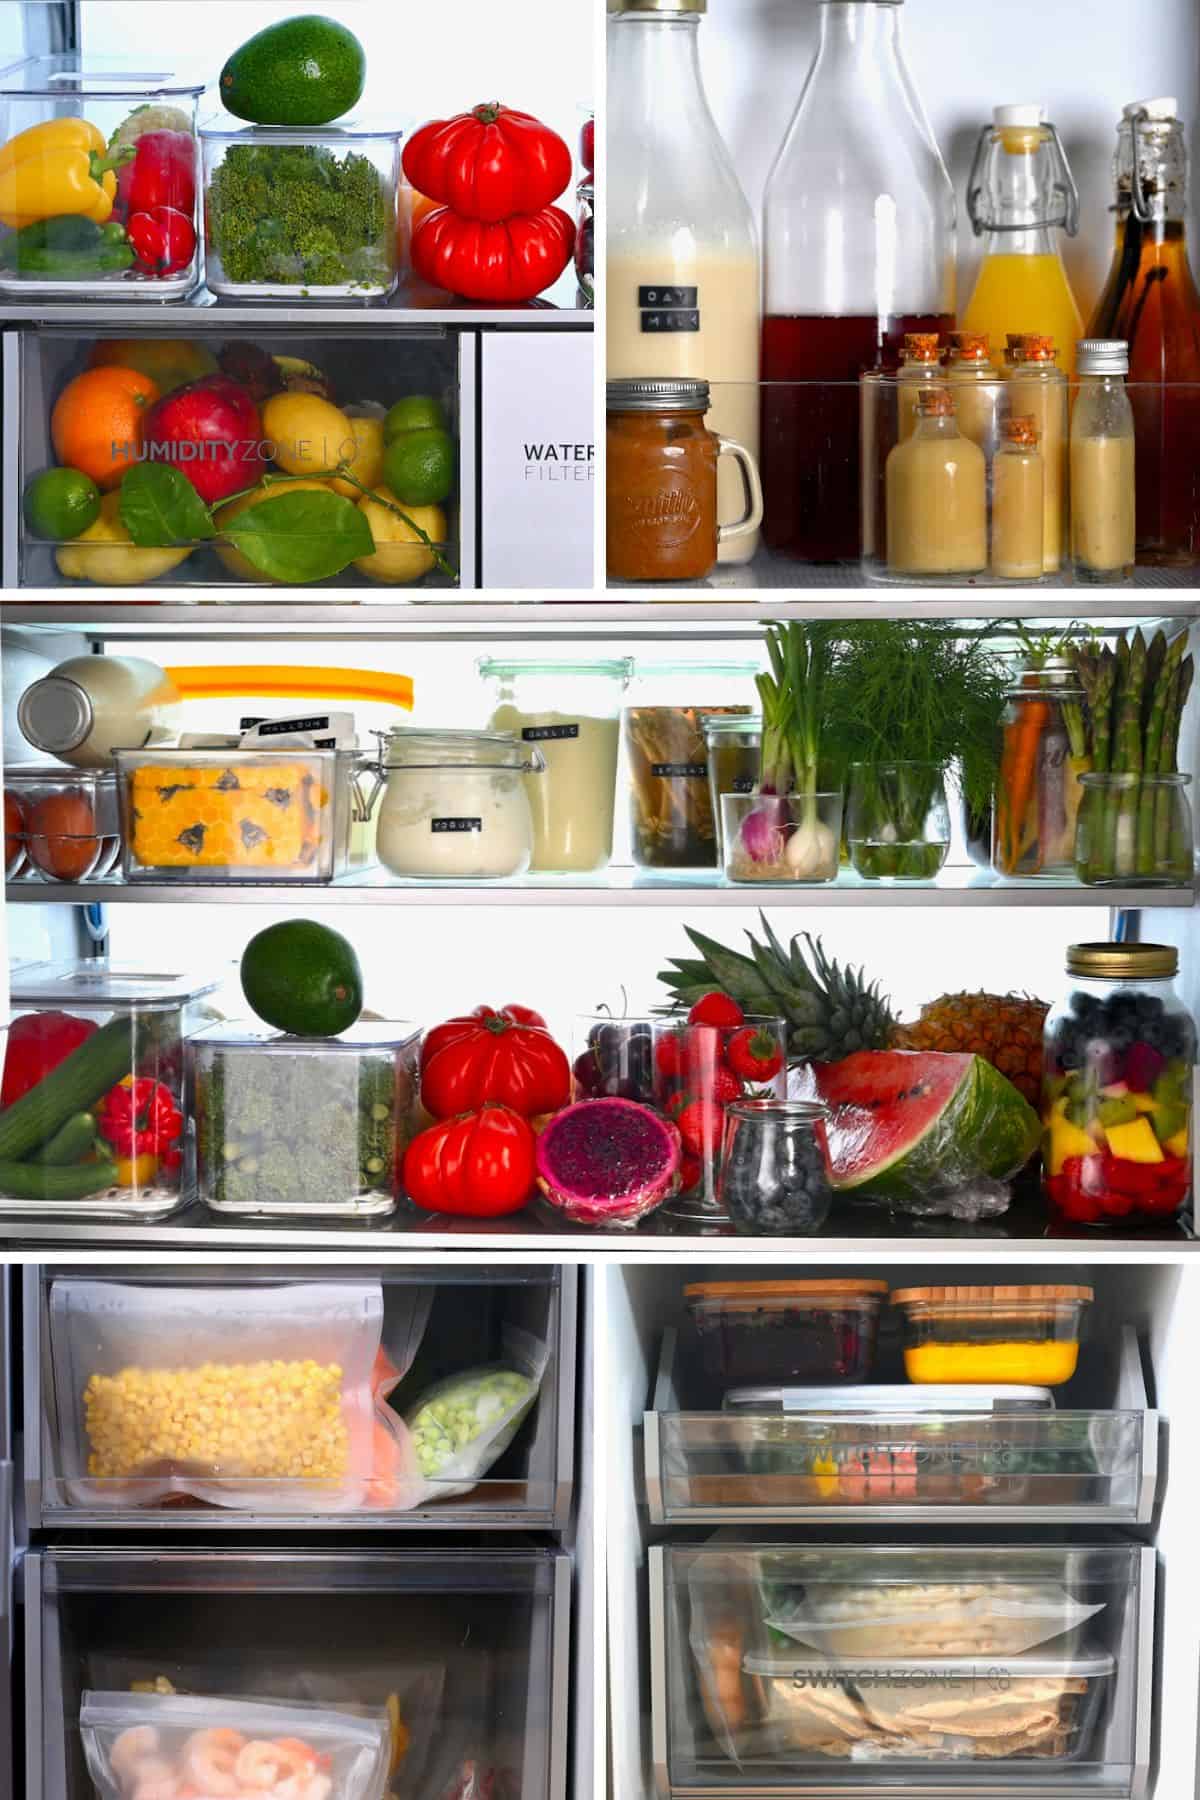 How To Create The Perfectly Organized Fridge and Freezer